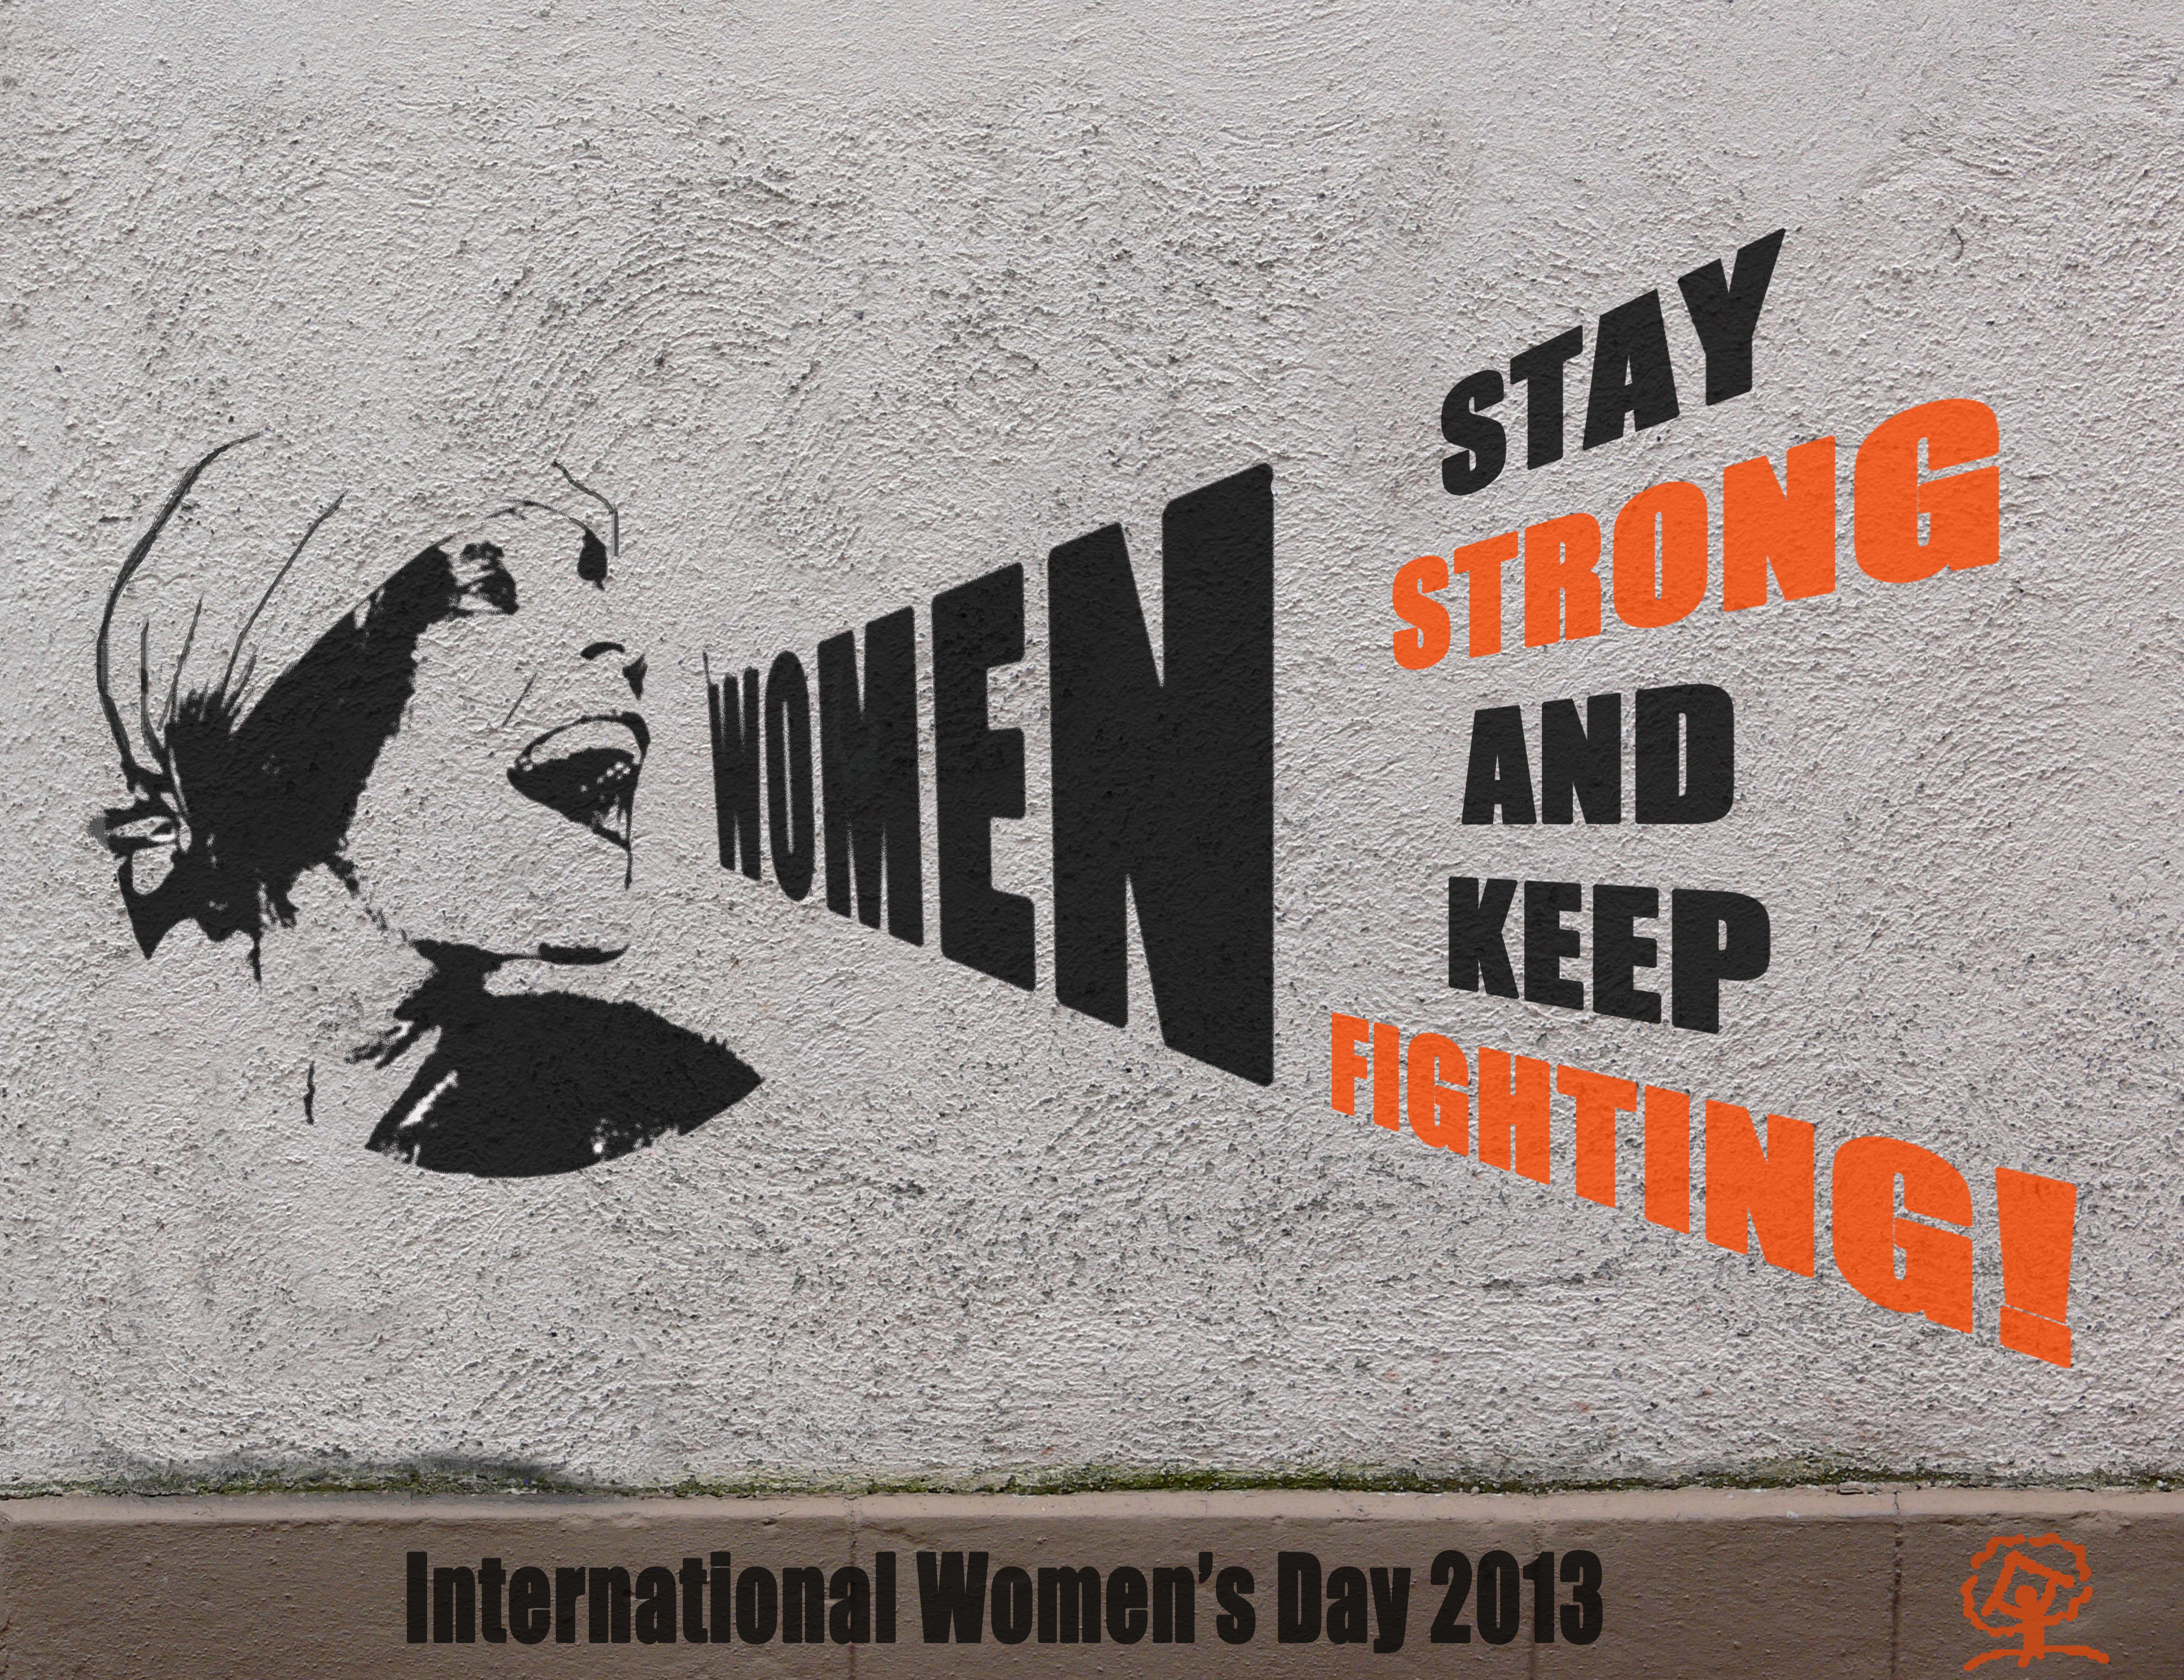 International Women’s Day 2013: Women’s habitat rights now, for just and inclusive societies!